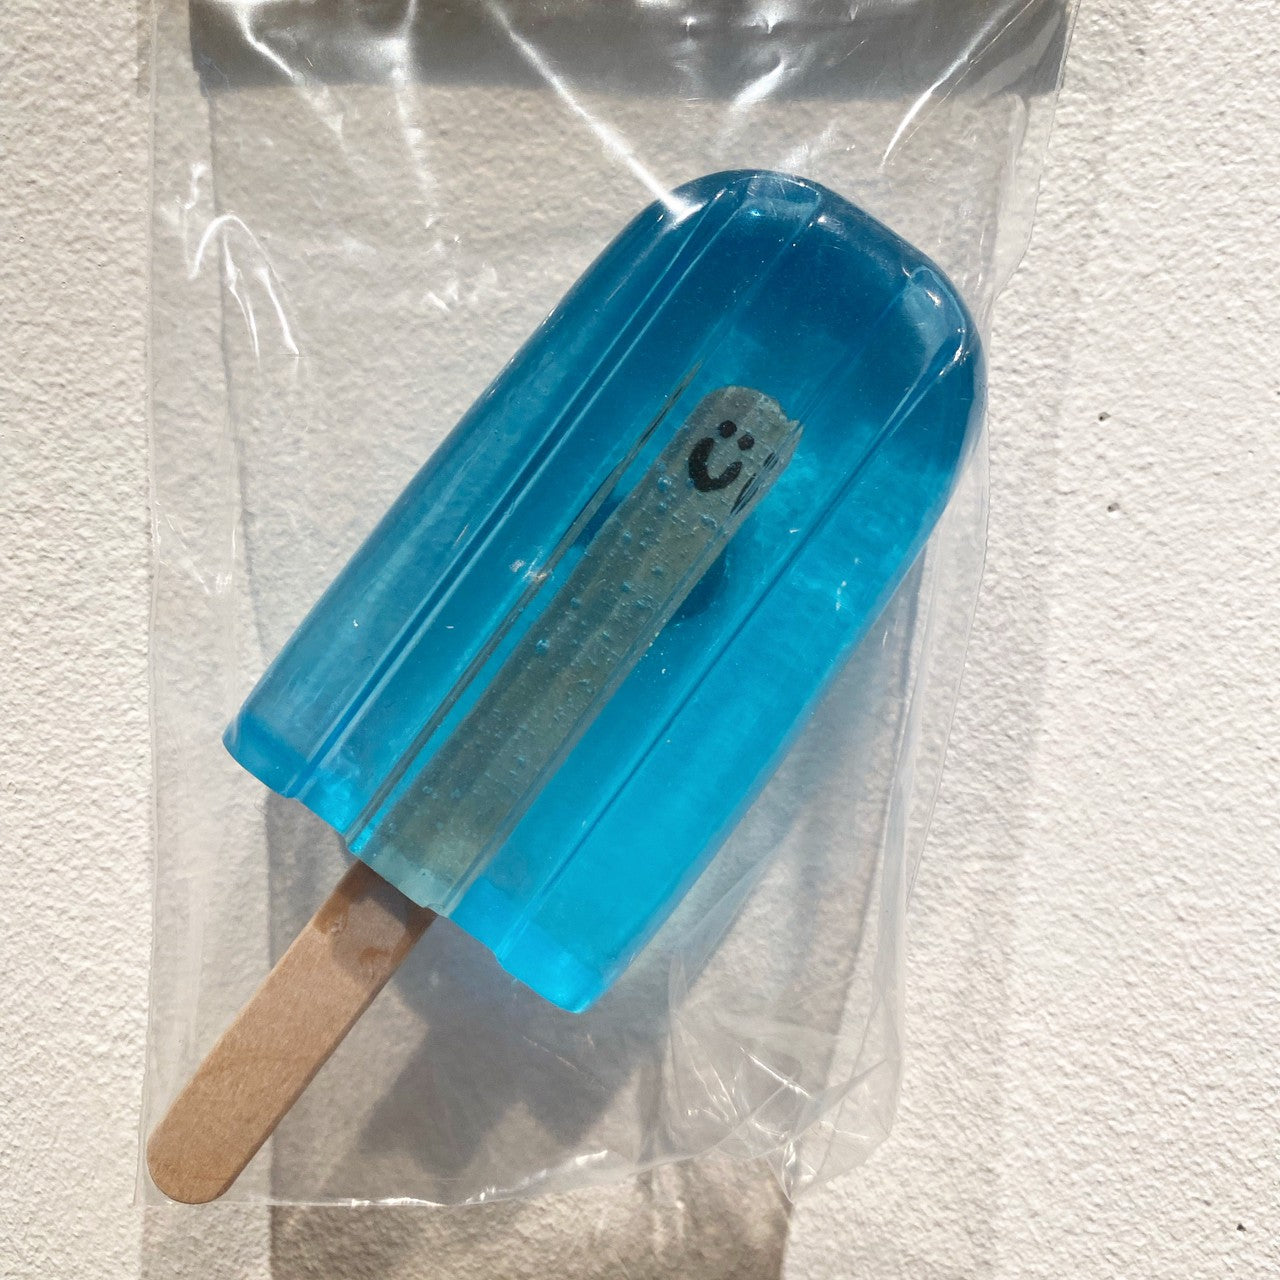 ELLYLAND chemical ice candy